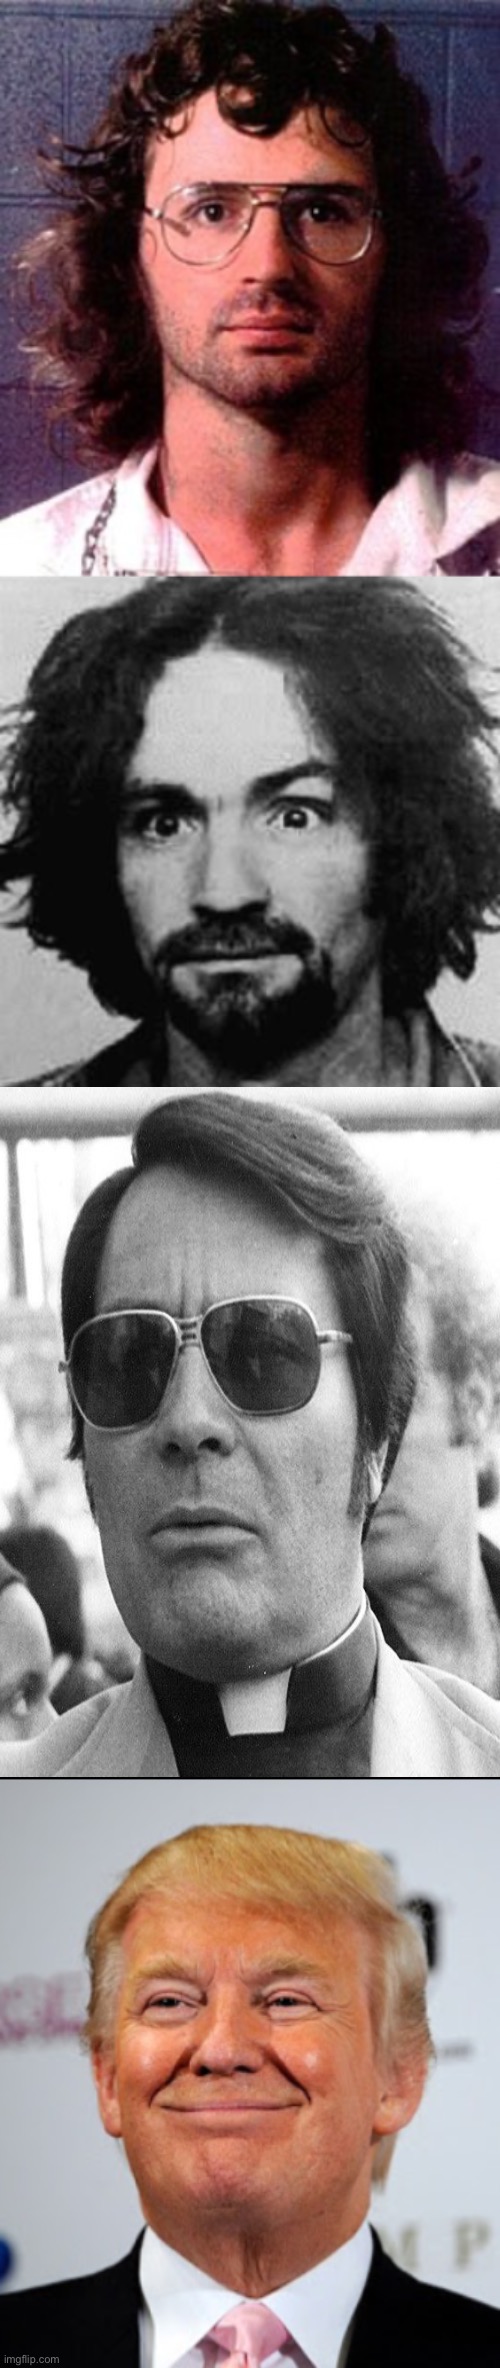 image tagged in waco,charles manson,jim jones,donald trump approves | made w/ Imgflip meme maker